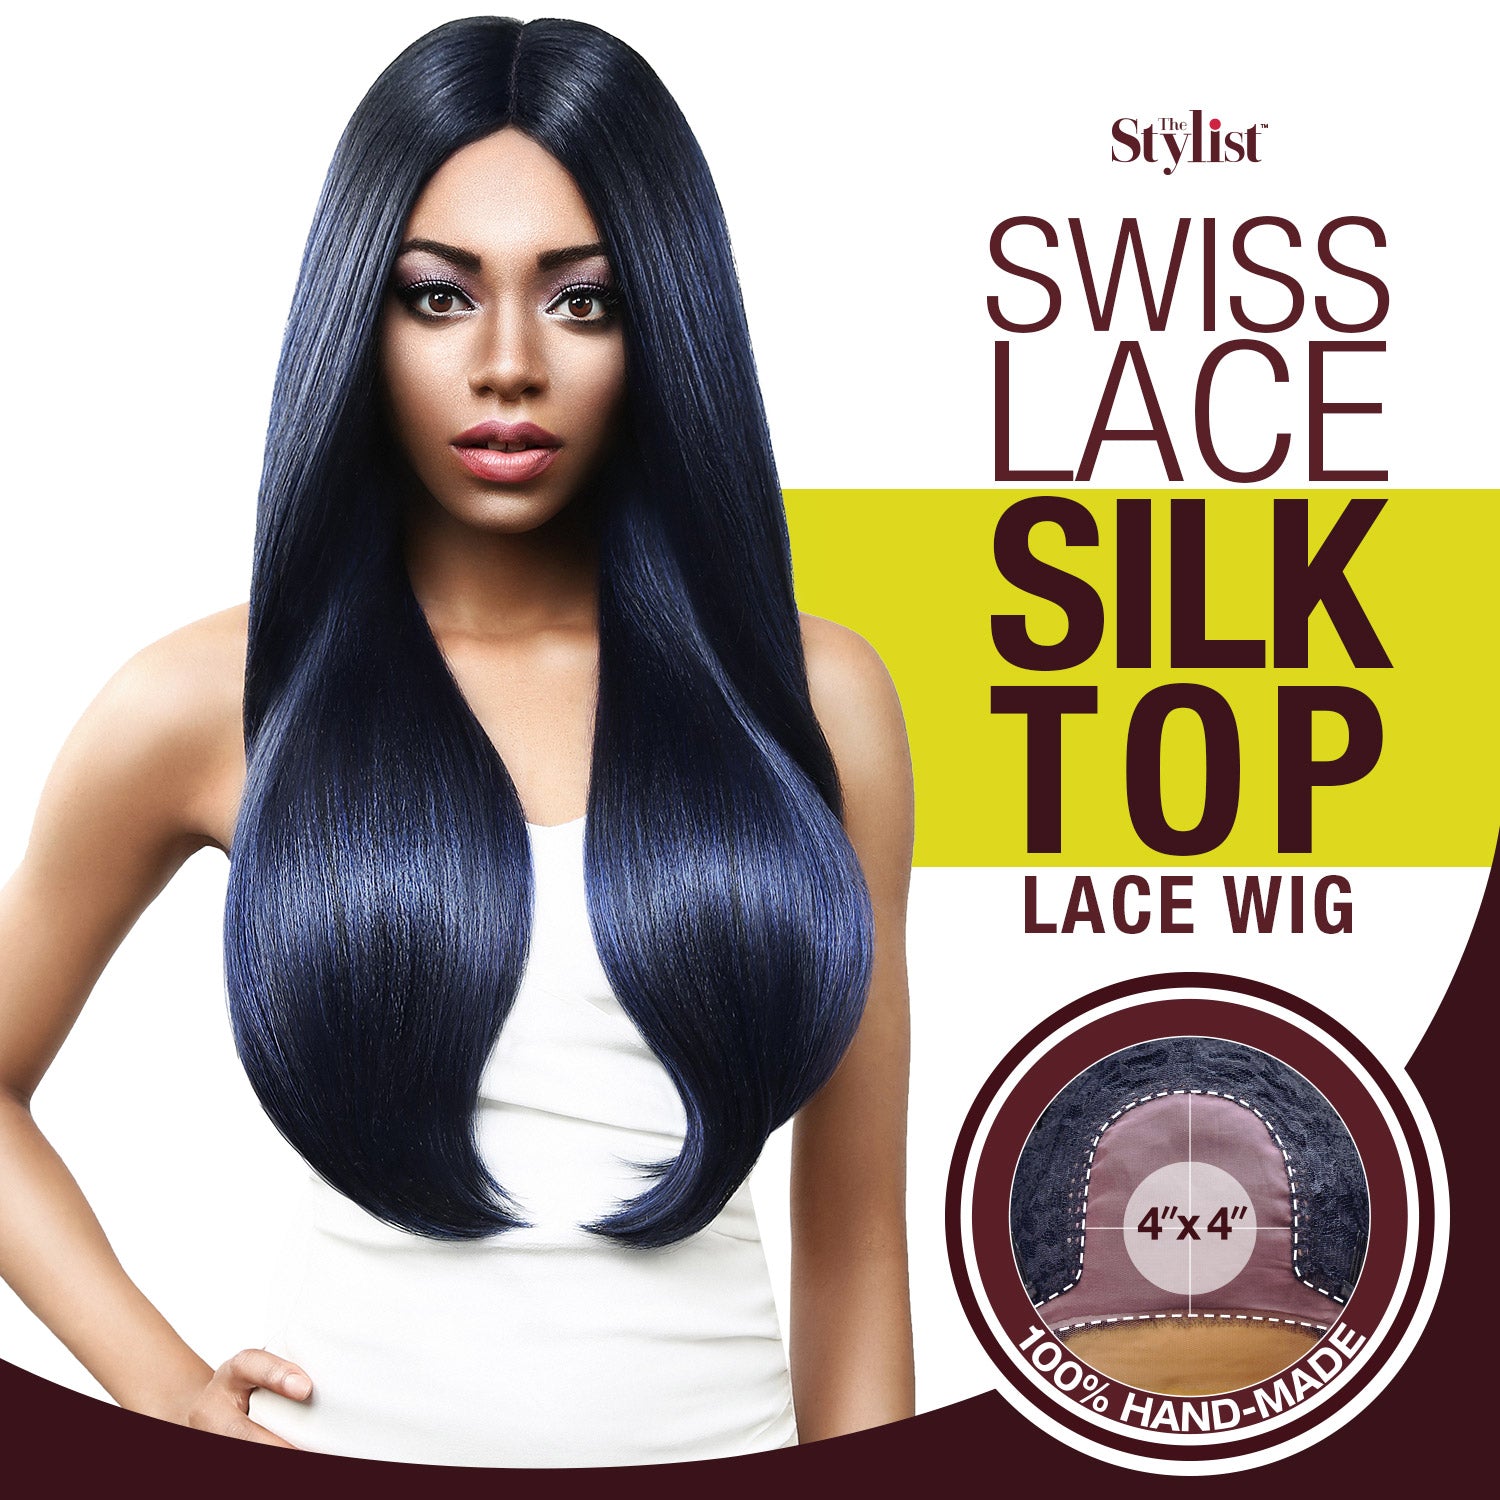 Synthetic Lace Front Wig Swiss Lace Silk Top Swiss Goddess